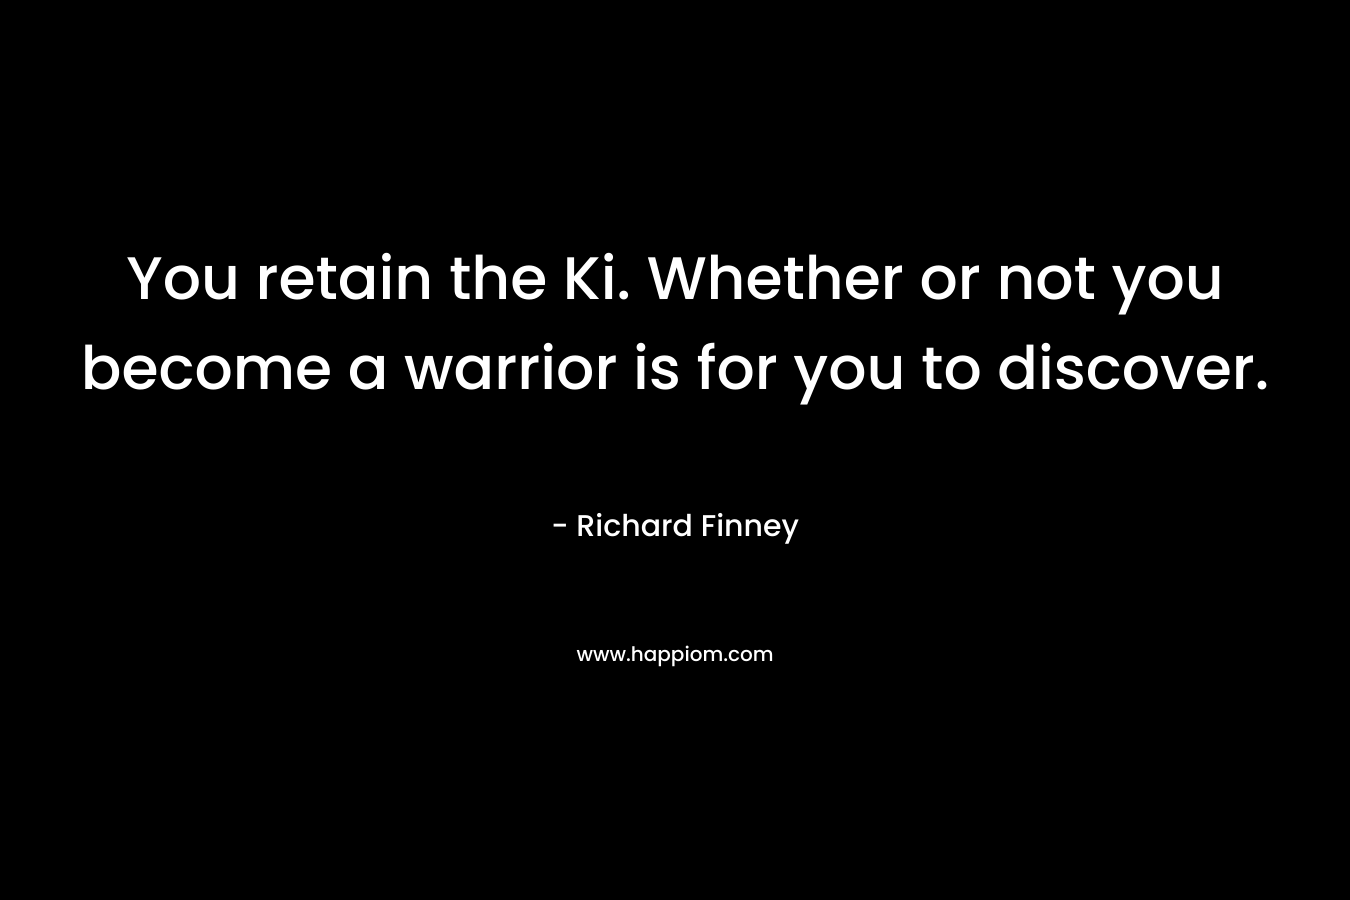 You retain the Ki. Whether or not you become a warrior is for you to discover.